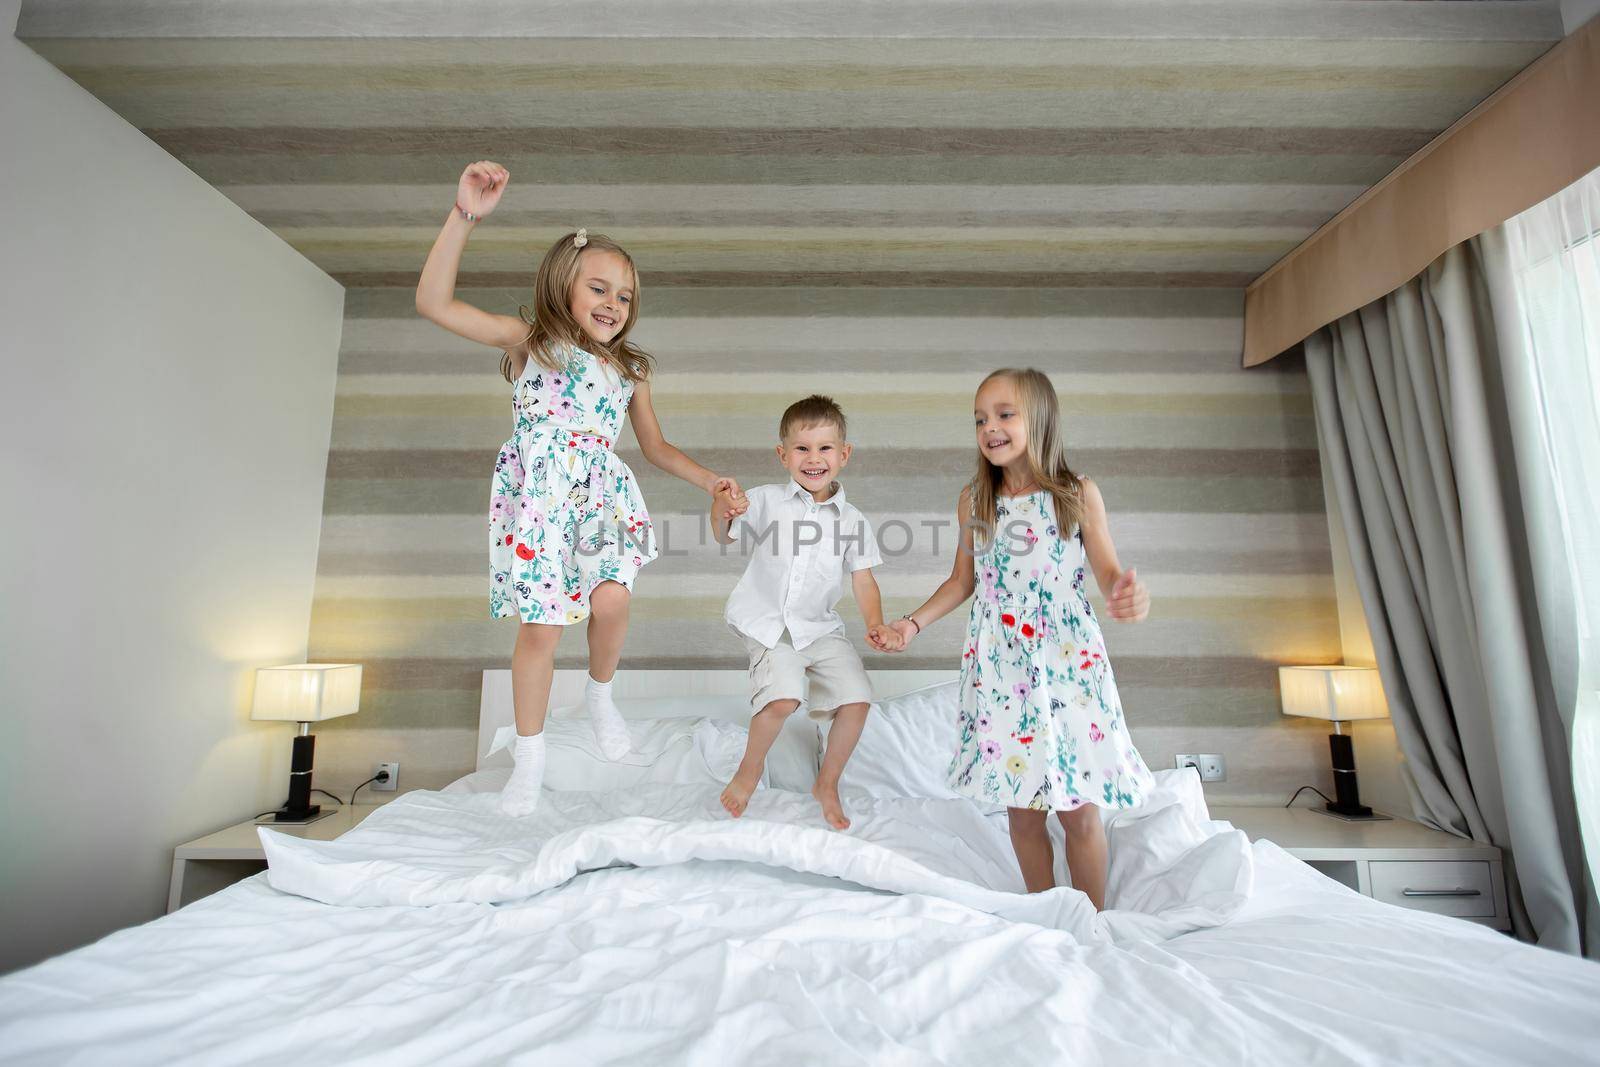 Happy kids jumping, having fun, playing on bed in bedroom